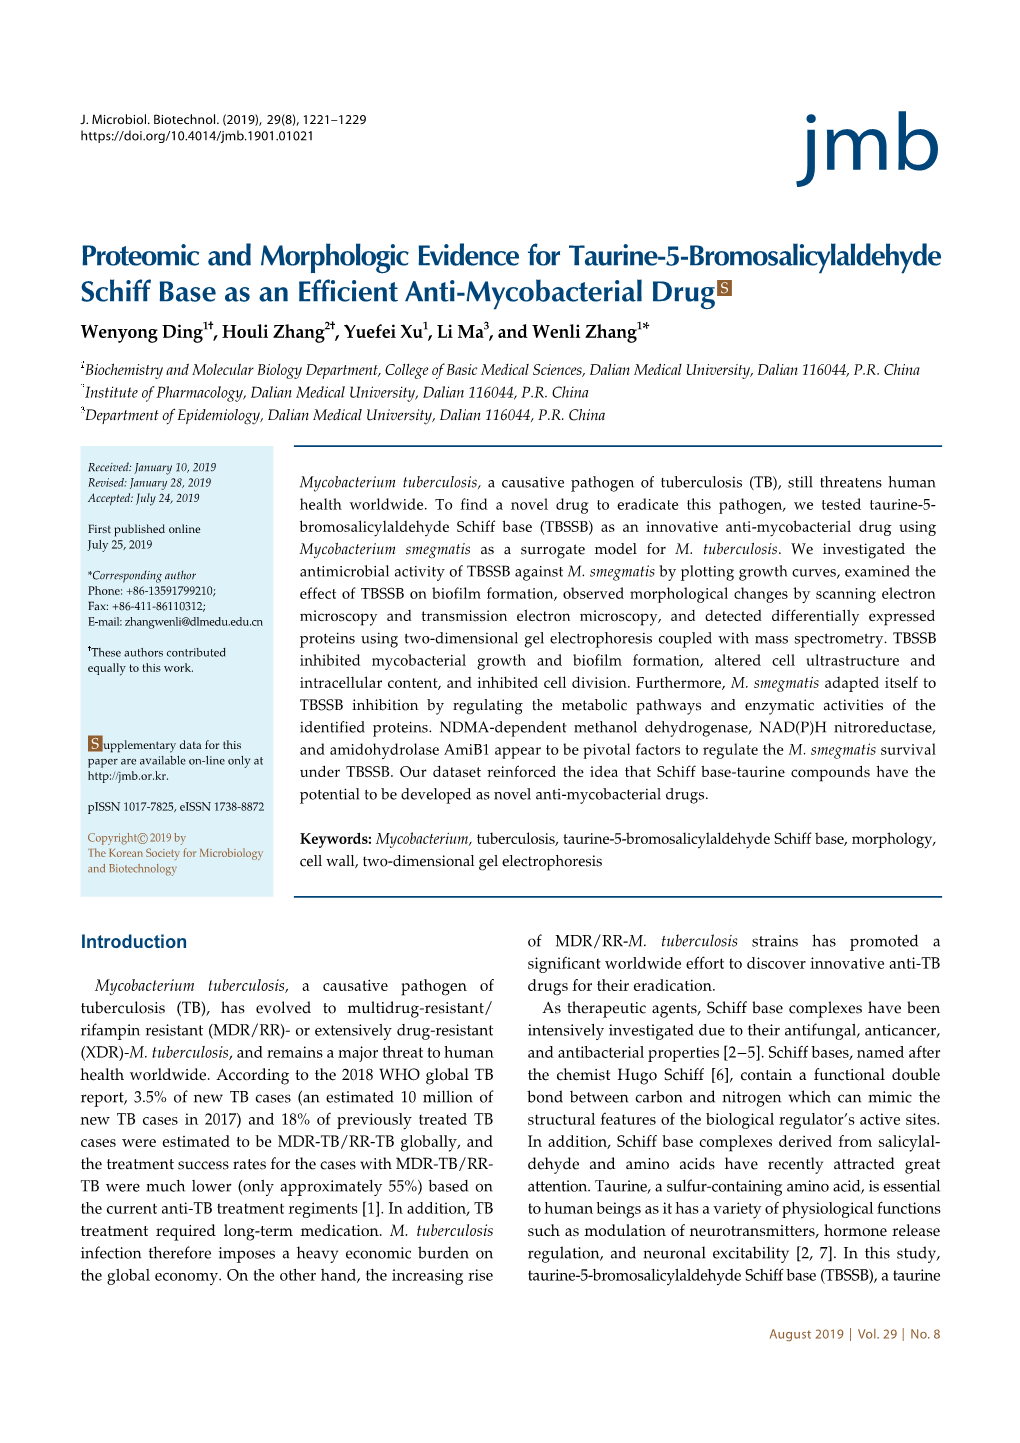 Proteomic and Morphologic Evidence for Taurine-5-Bromosalicylaldehyde Schiff Base As an Efficient Anti-Mycobacterial Drug